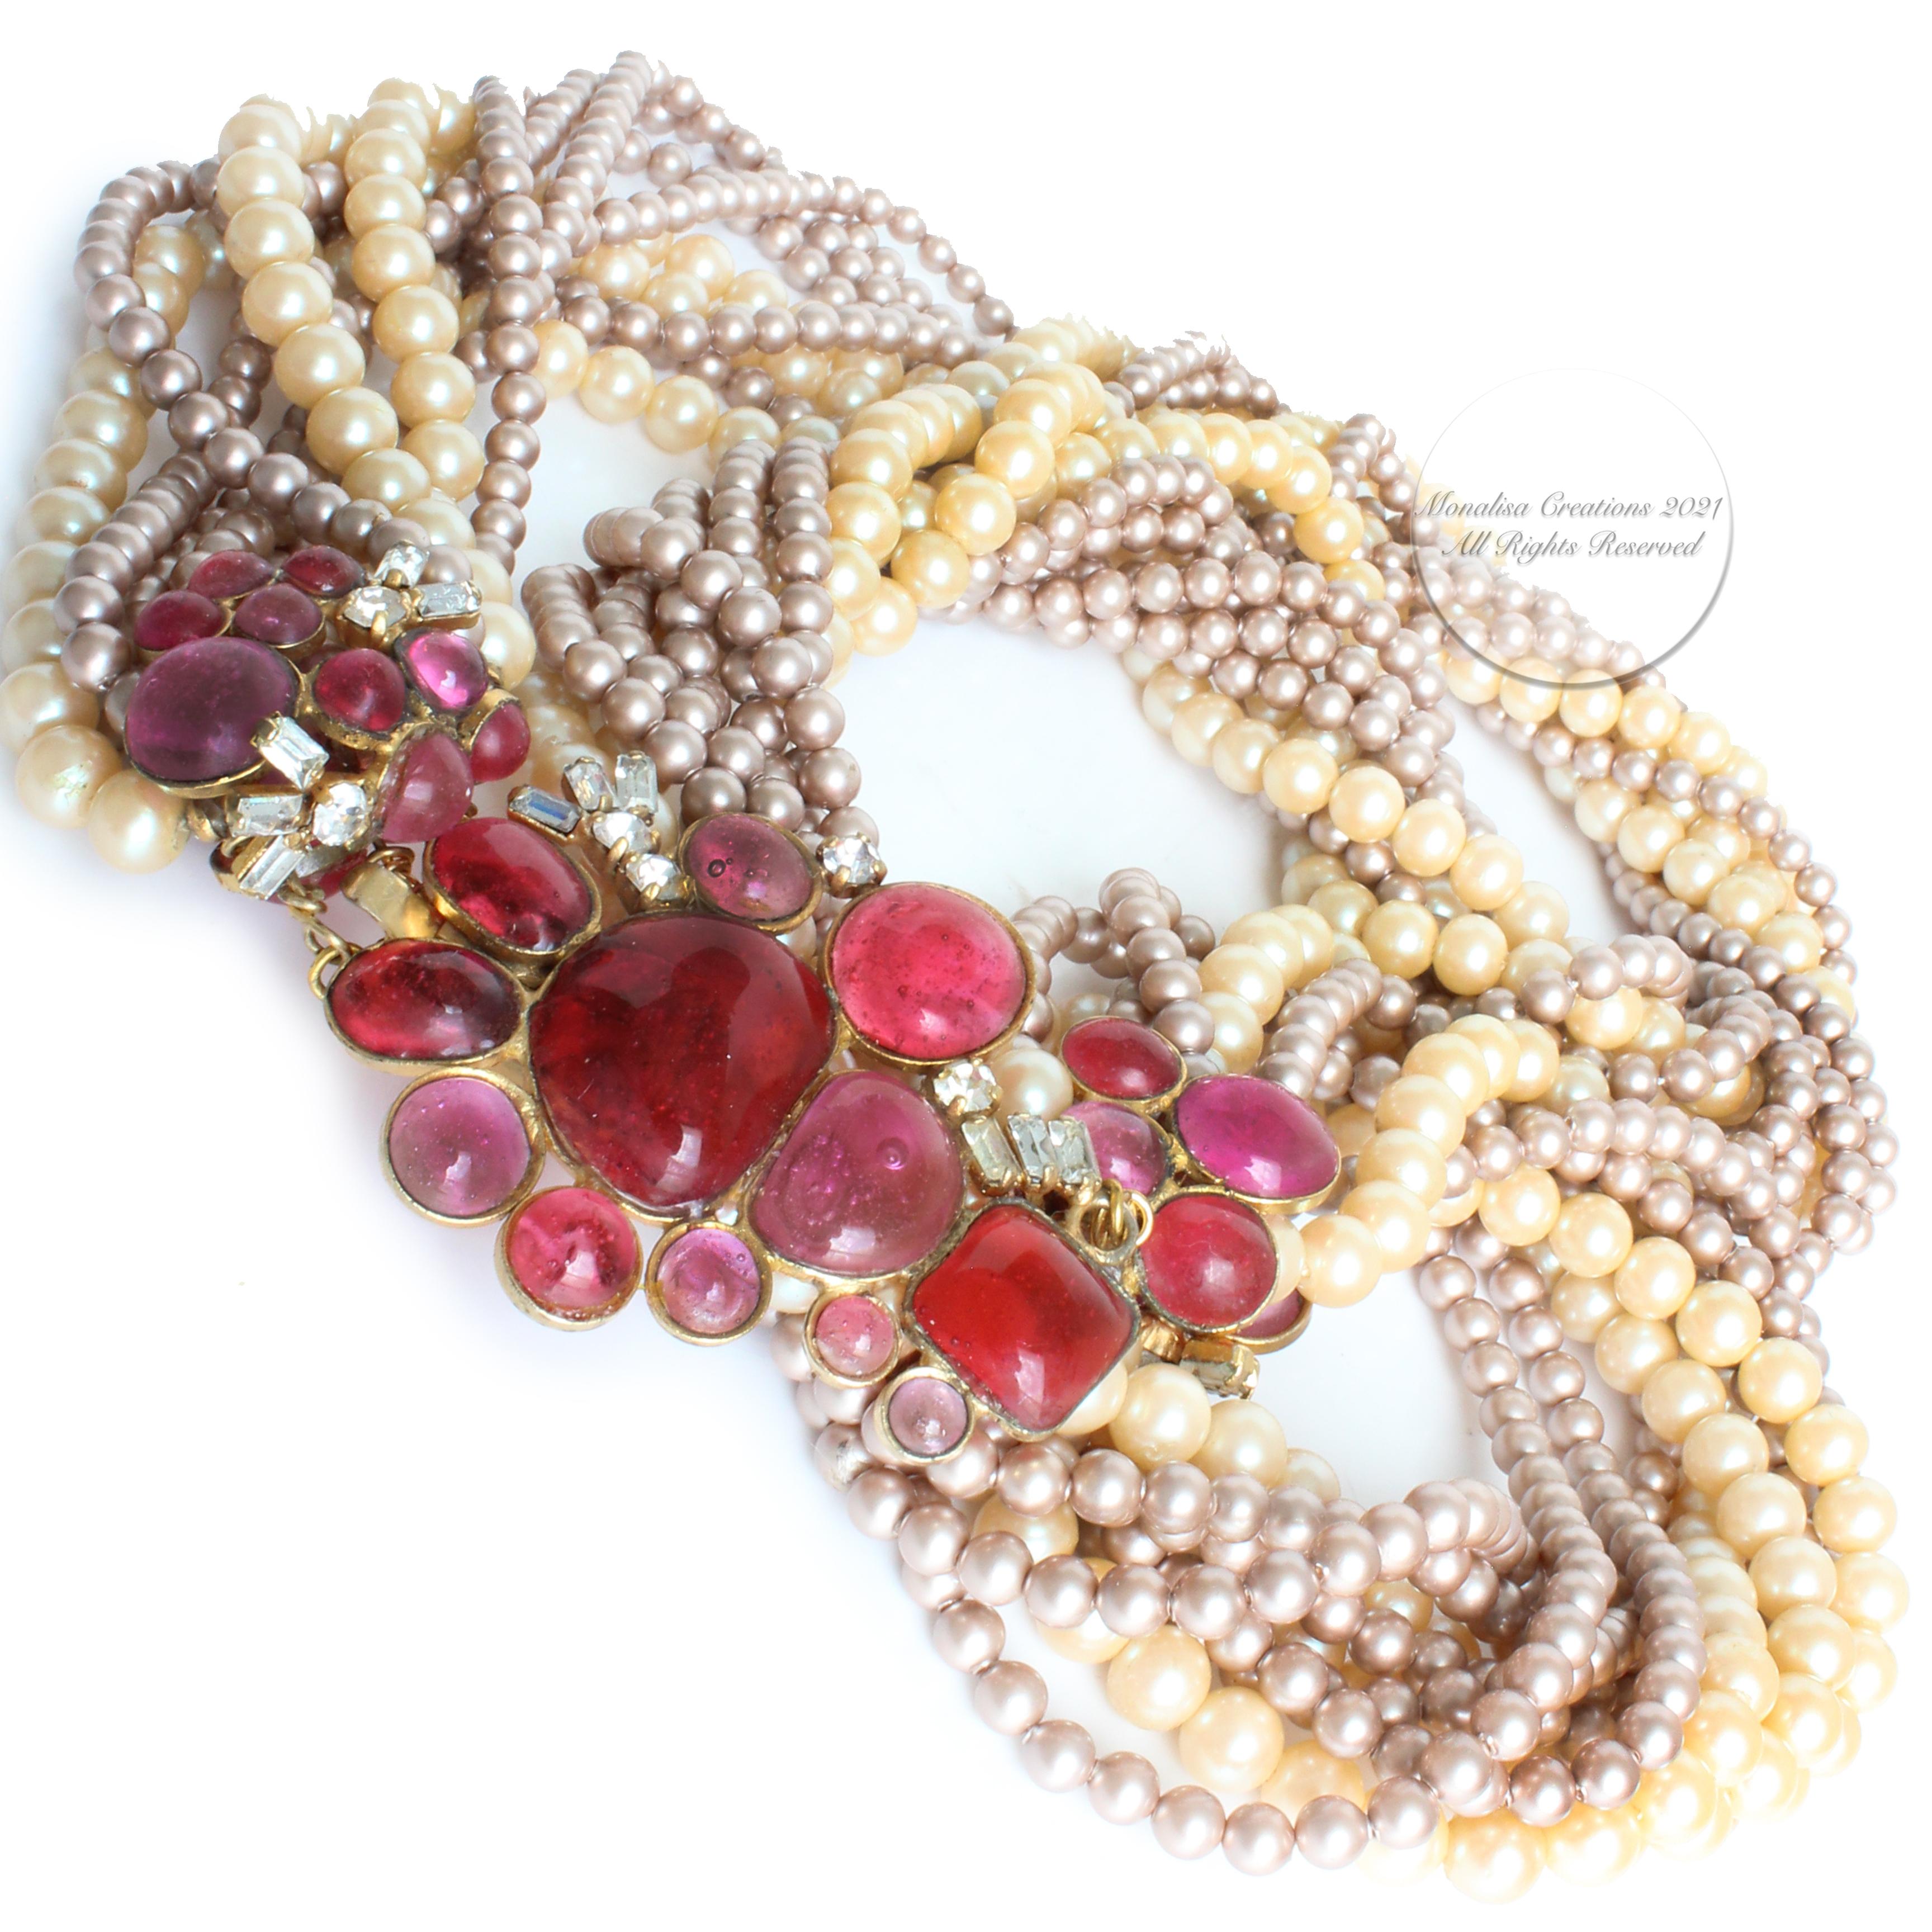 Women's Chanel Necklace Faux Pearl Multistrand Poured Glass Camellia Accents Goossens 